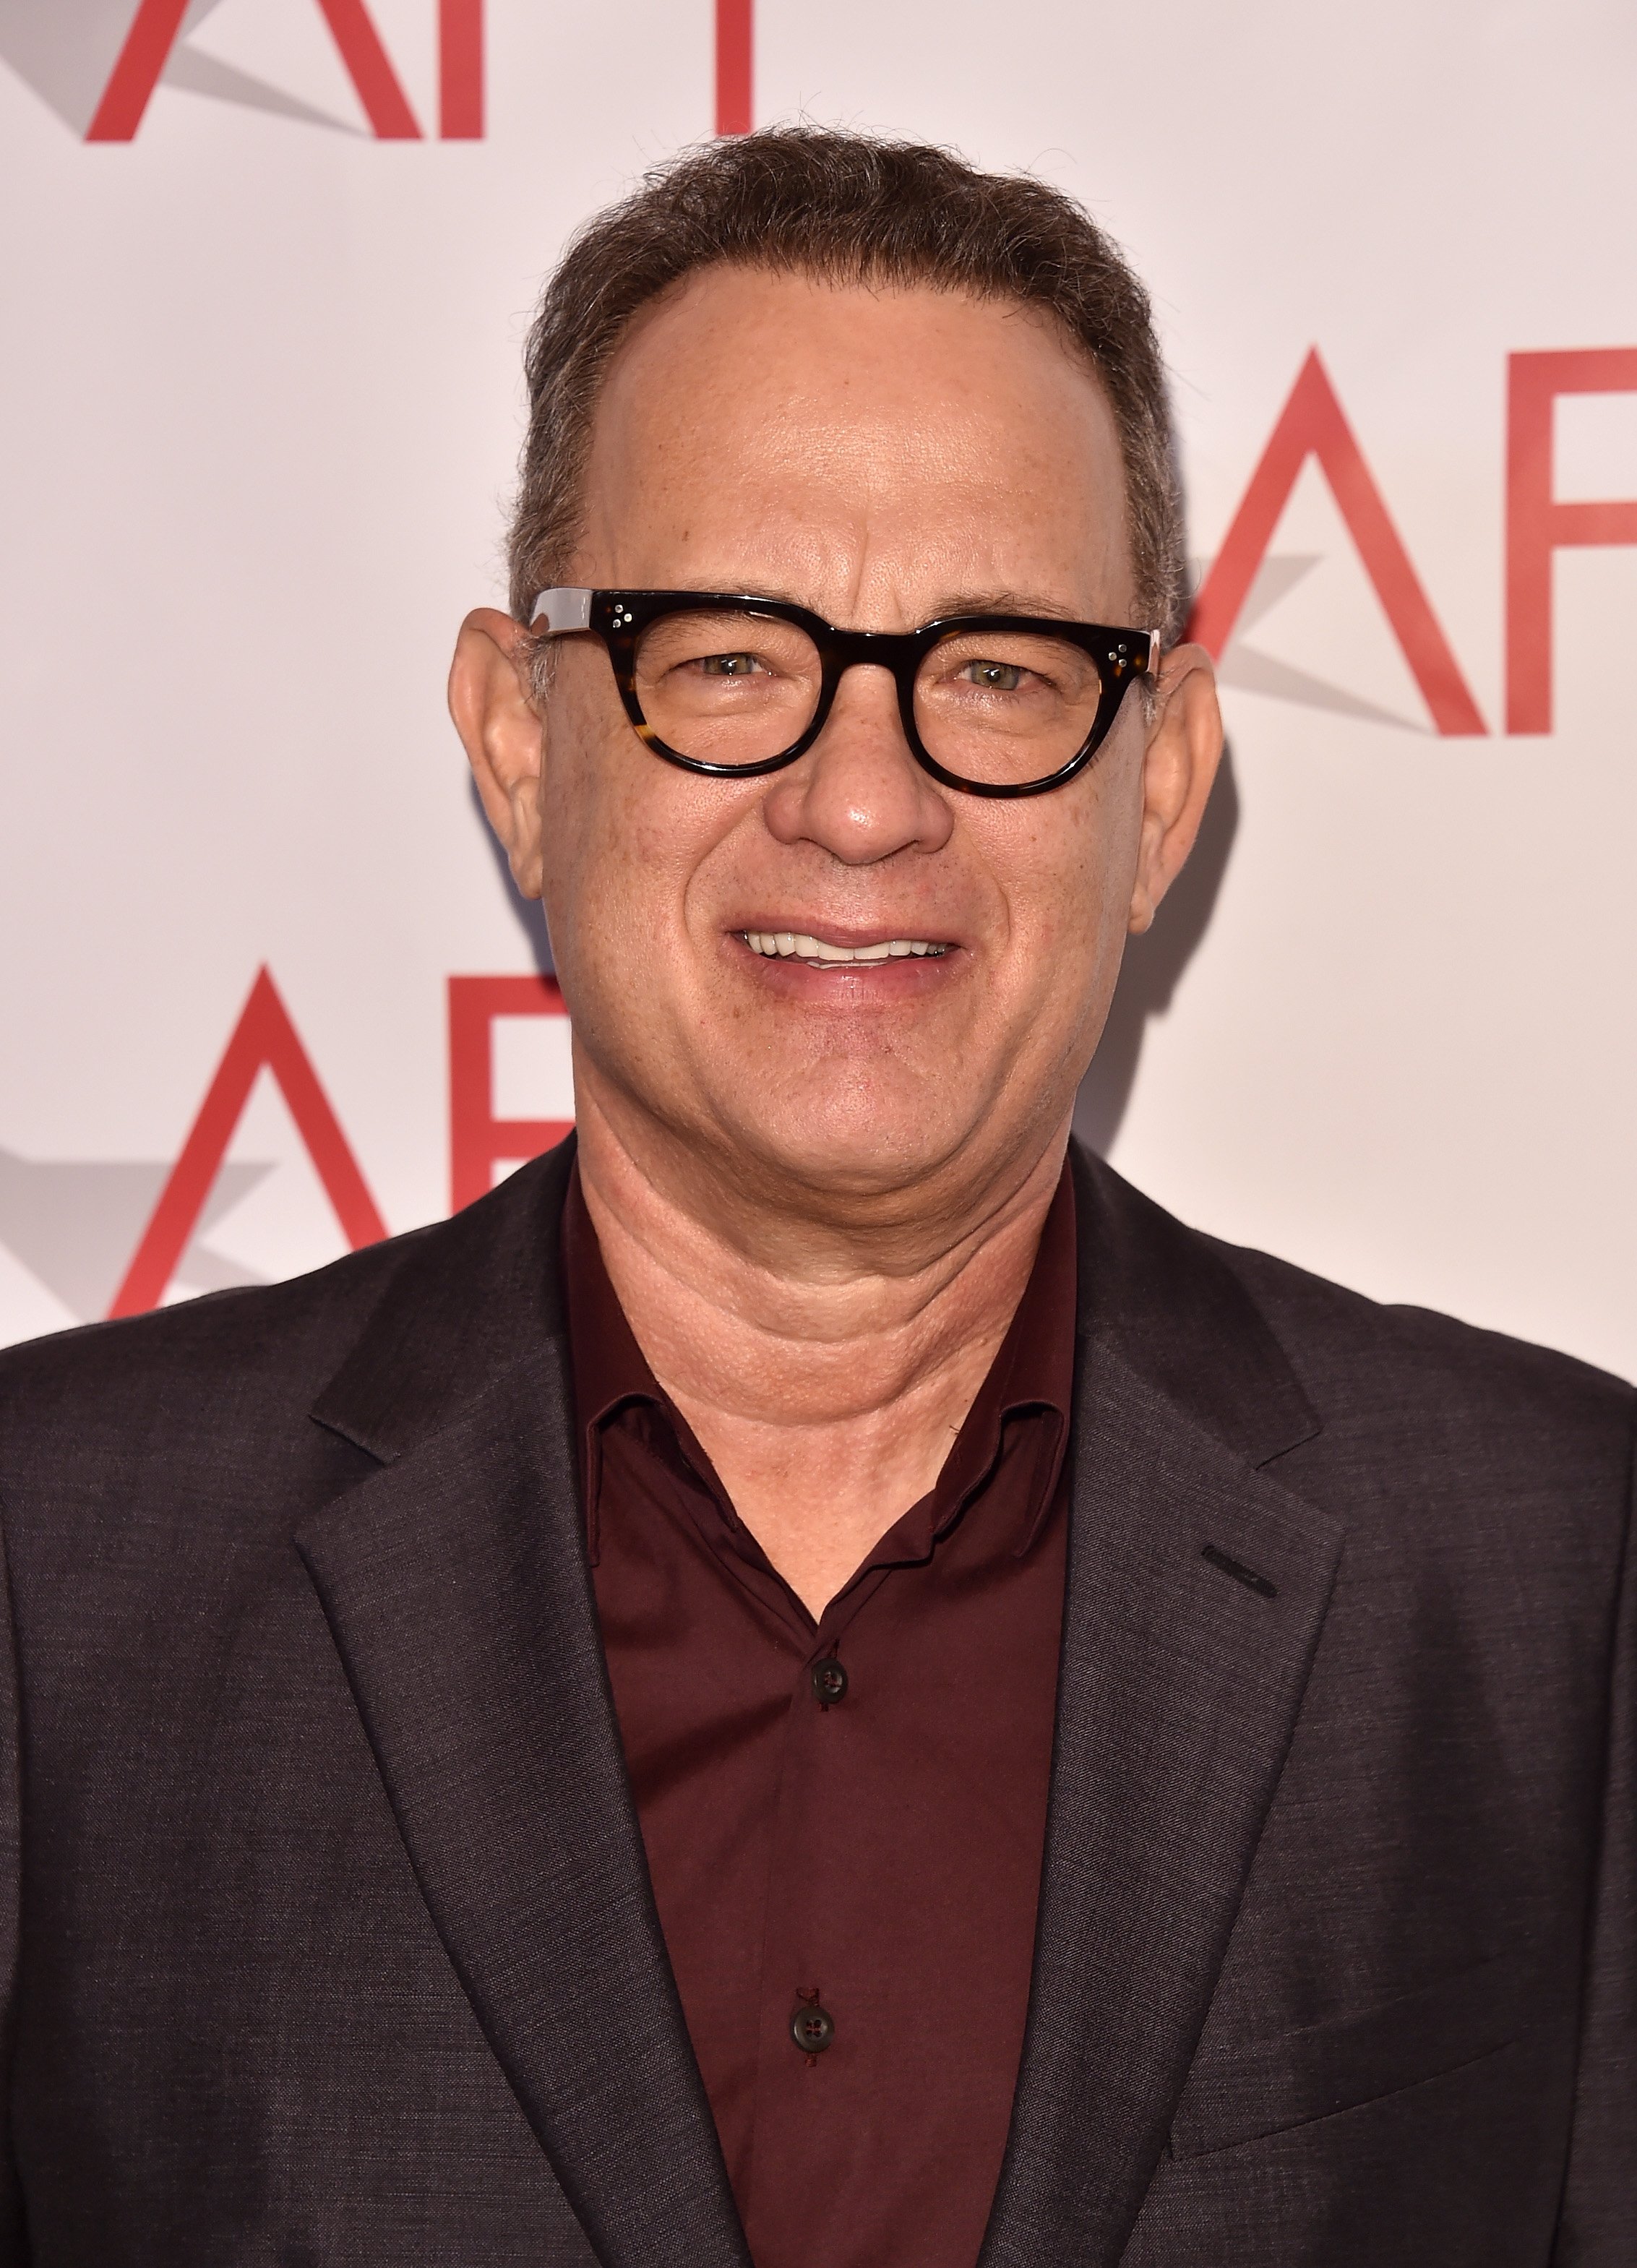 Tom Hanks attends the 18th Annual AFI Awards on January 5, 2018, in Los Angeles, California. | Source: Getty Images.